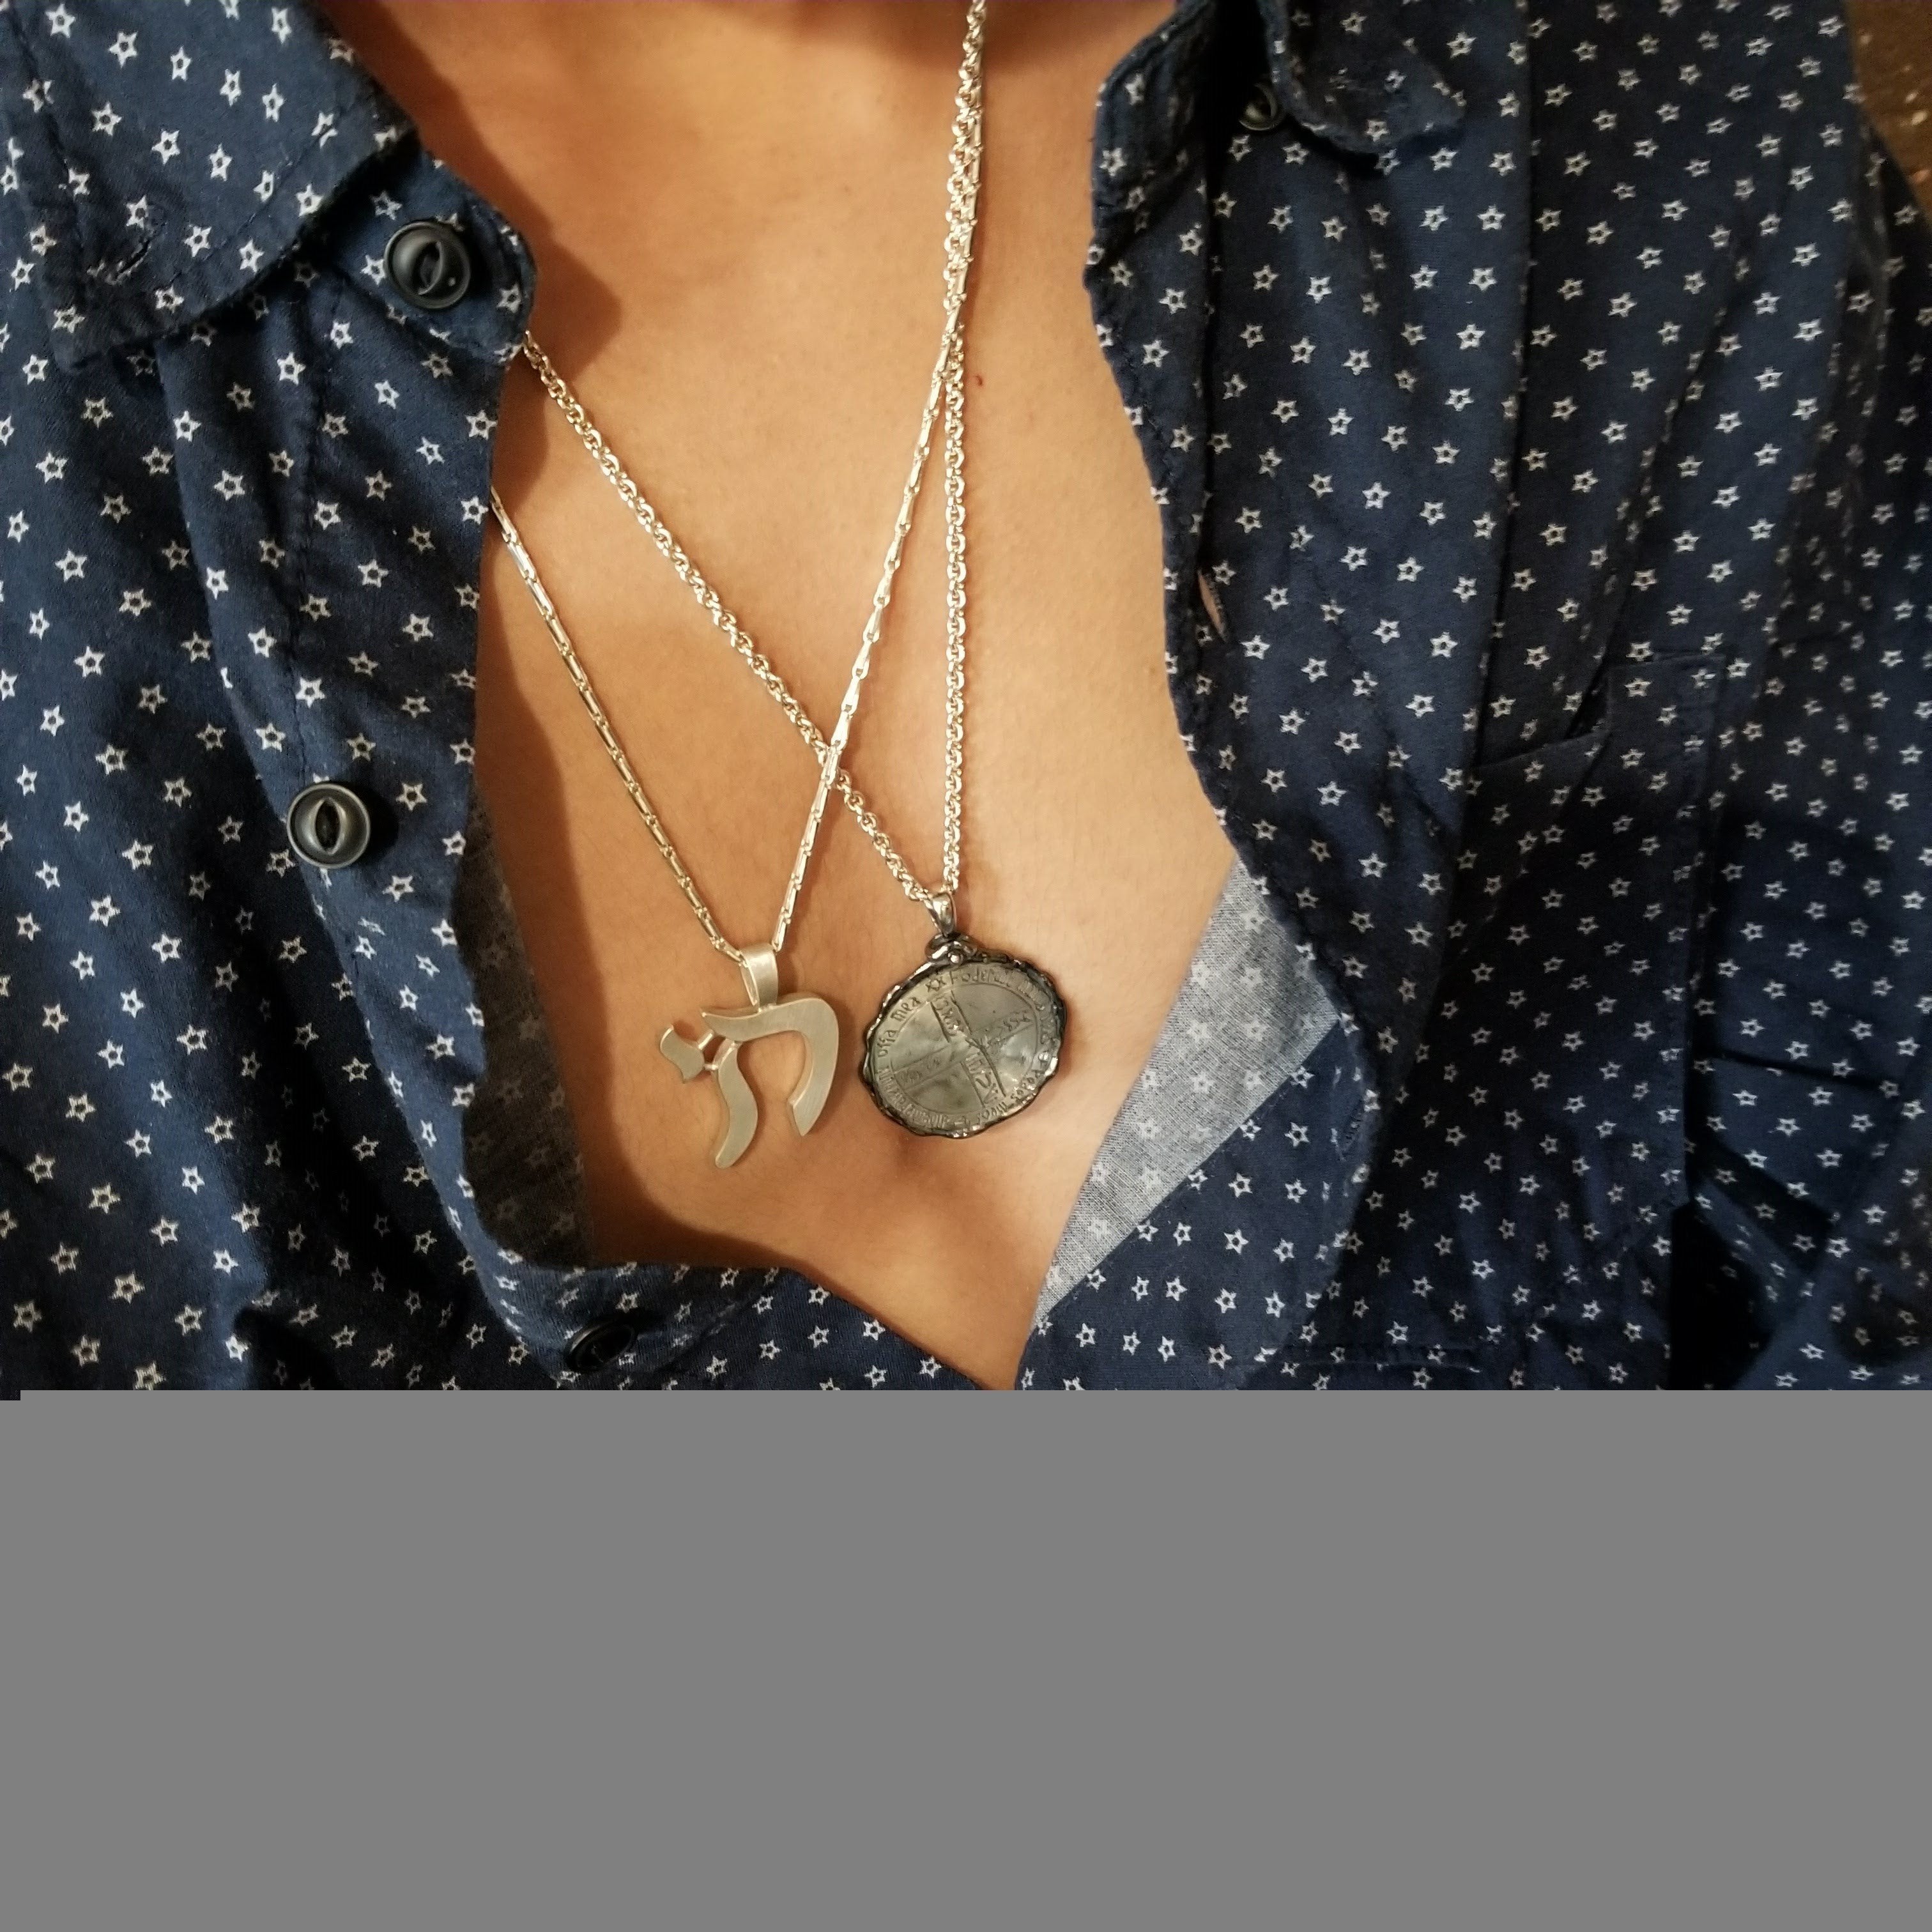 Why We’re Wearing a Seal of Solomon Necklace - Alef Bet by Paula